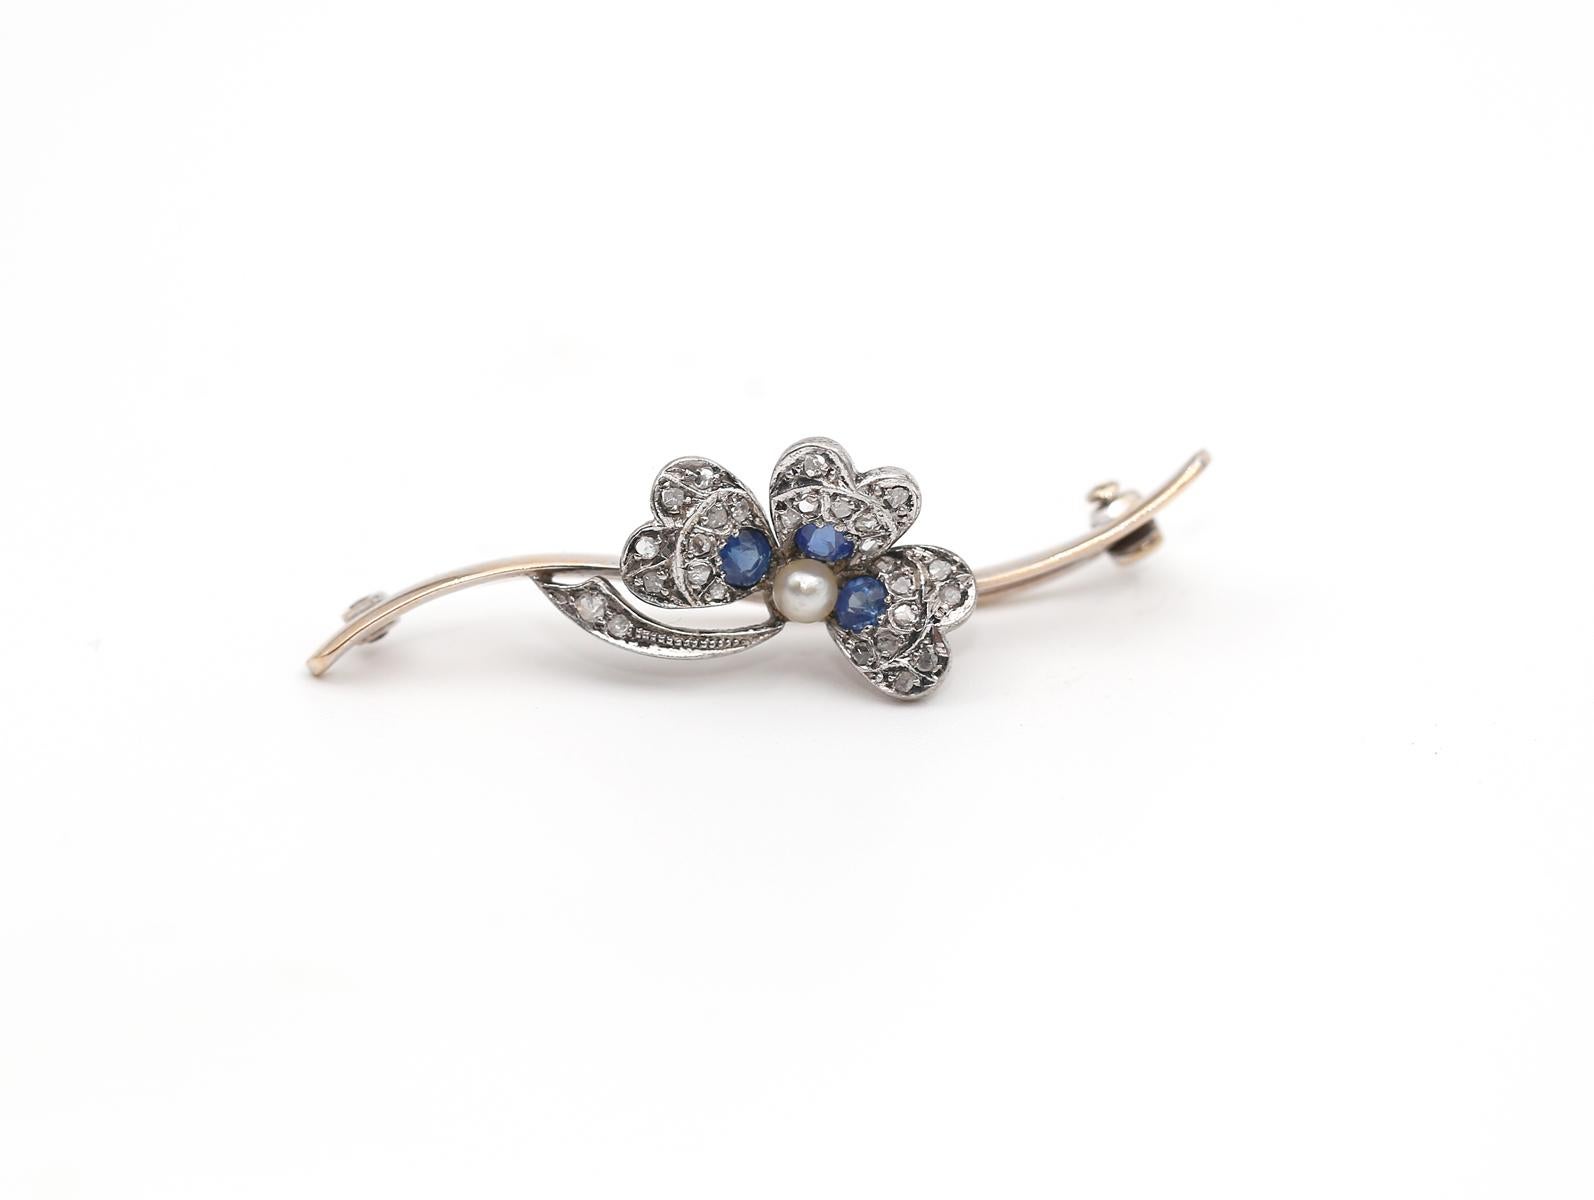 Art Deco Sapphire Diamond And Pearl Floral Brooch, created around 1900, this fine brooch represents a great example of the Art Deco era. Using floral ornamentation as a main theme. The flower appears really gentle and has fine detailing. A fine